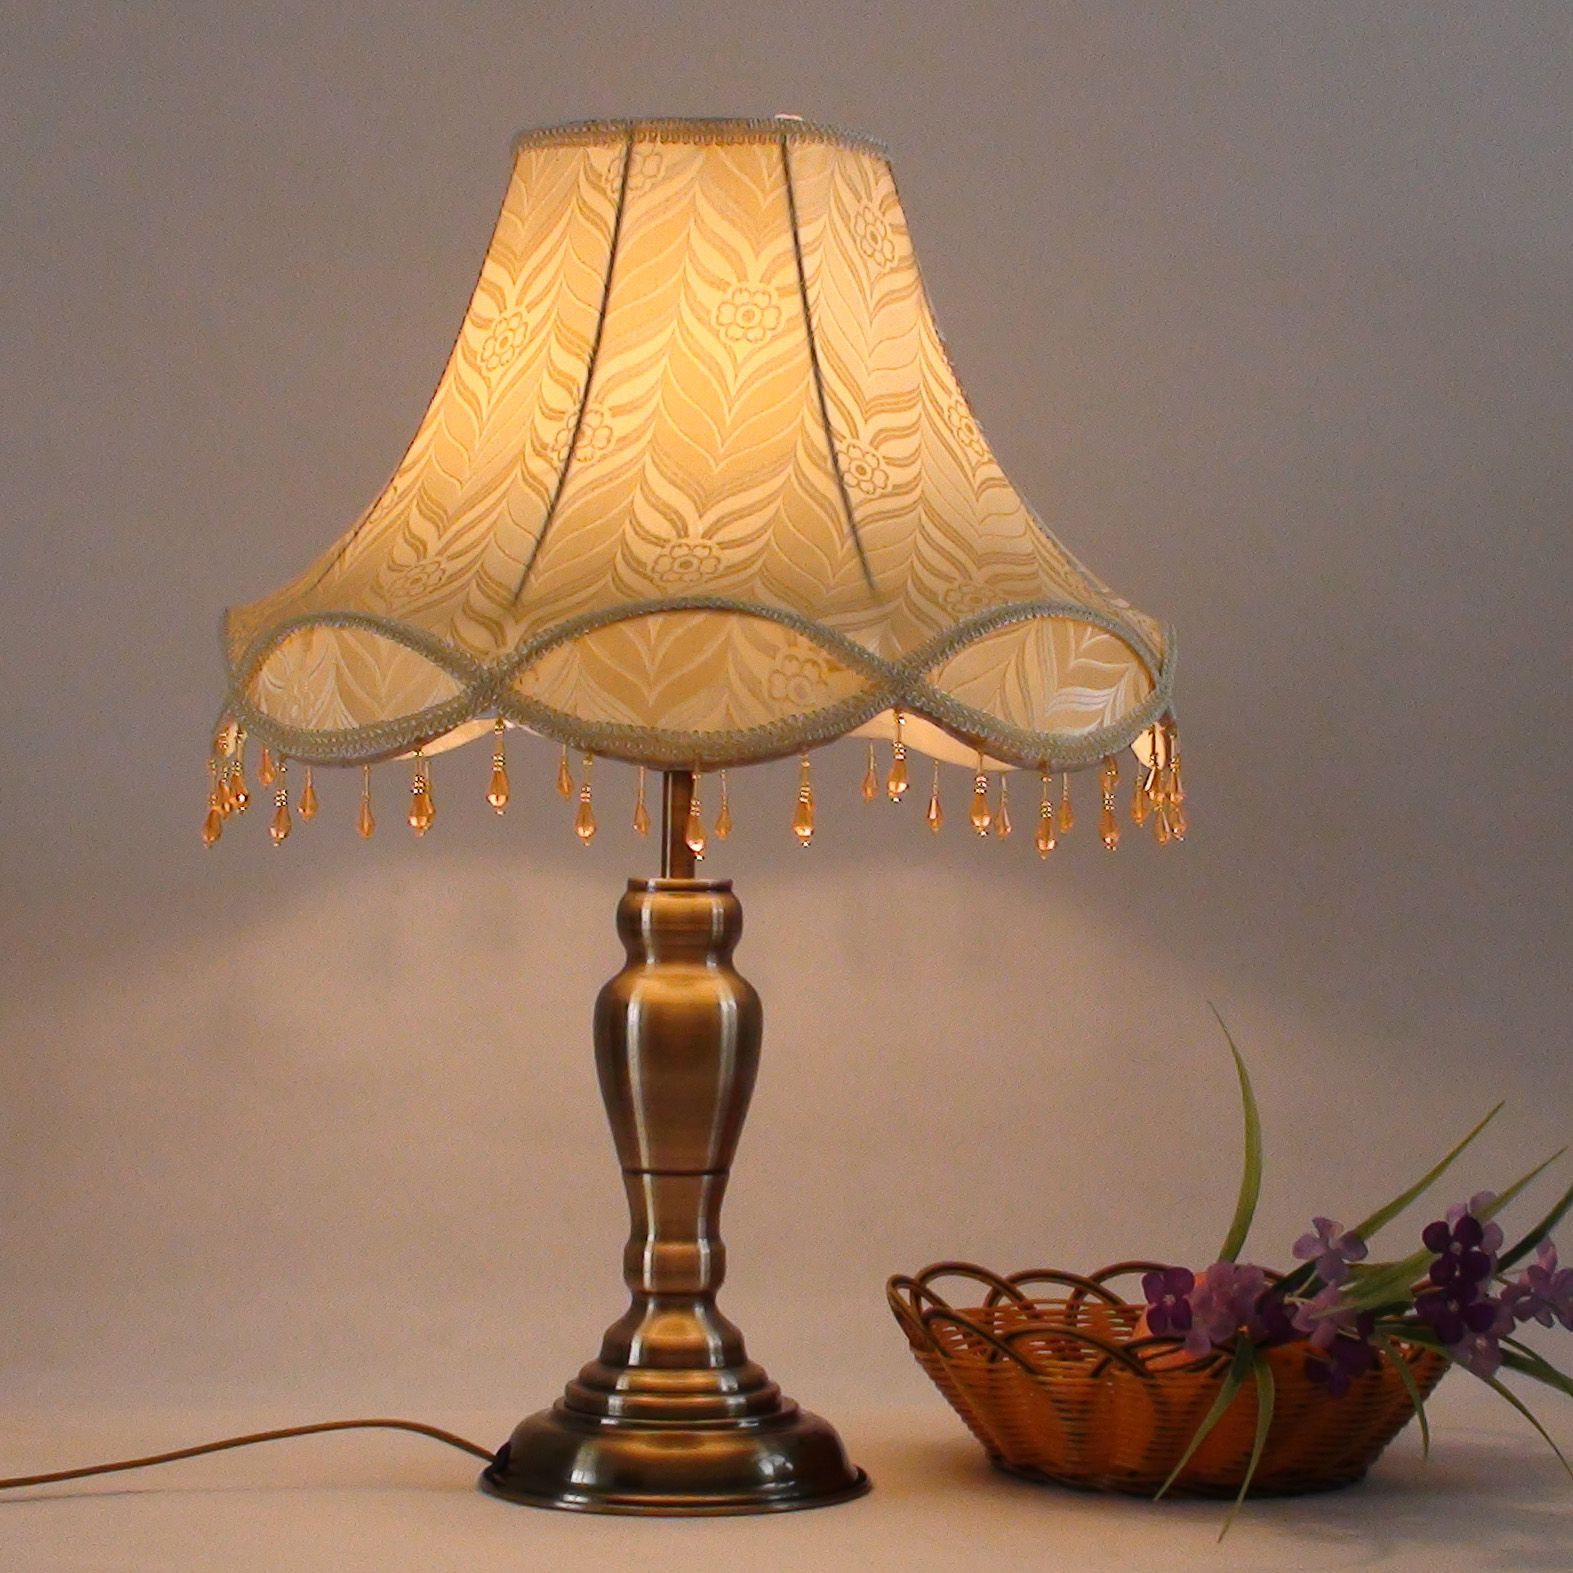 Fashion Antique Table Lamp Ofhead Lighting Guest Room Lamp Lighting